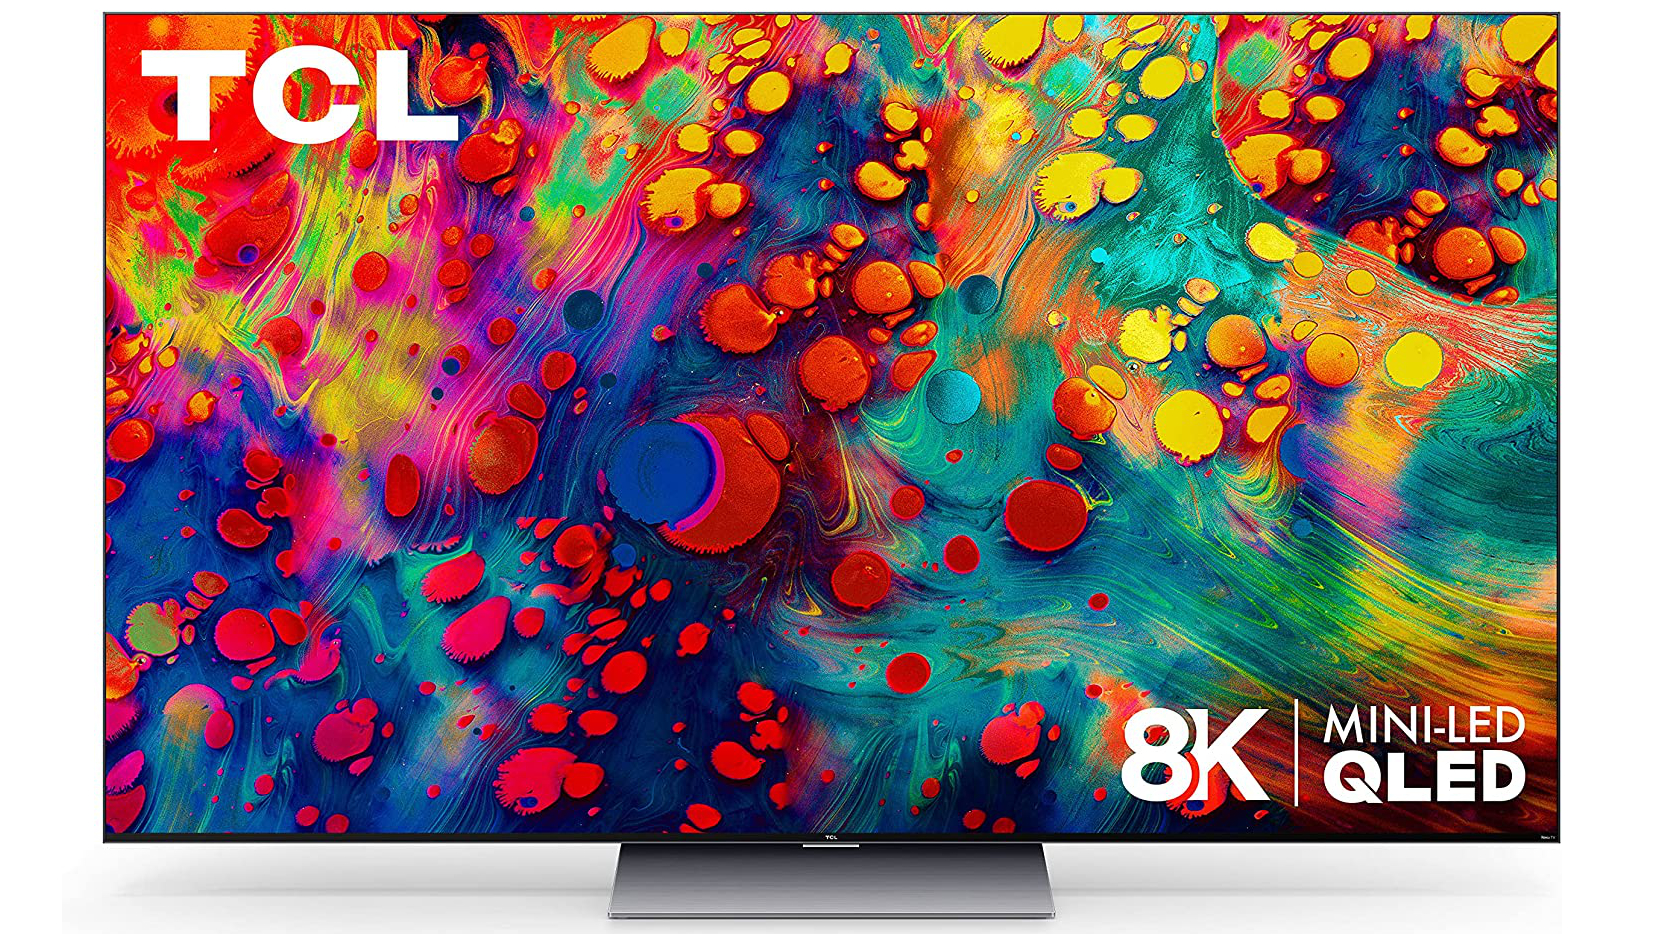 TCL 6 Series 65 inch 8K Mini LED QLED TV - The best 65-inch TVs